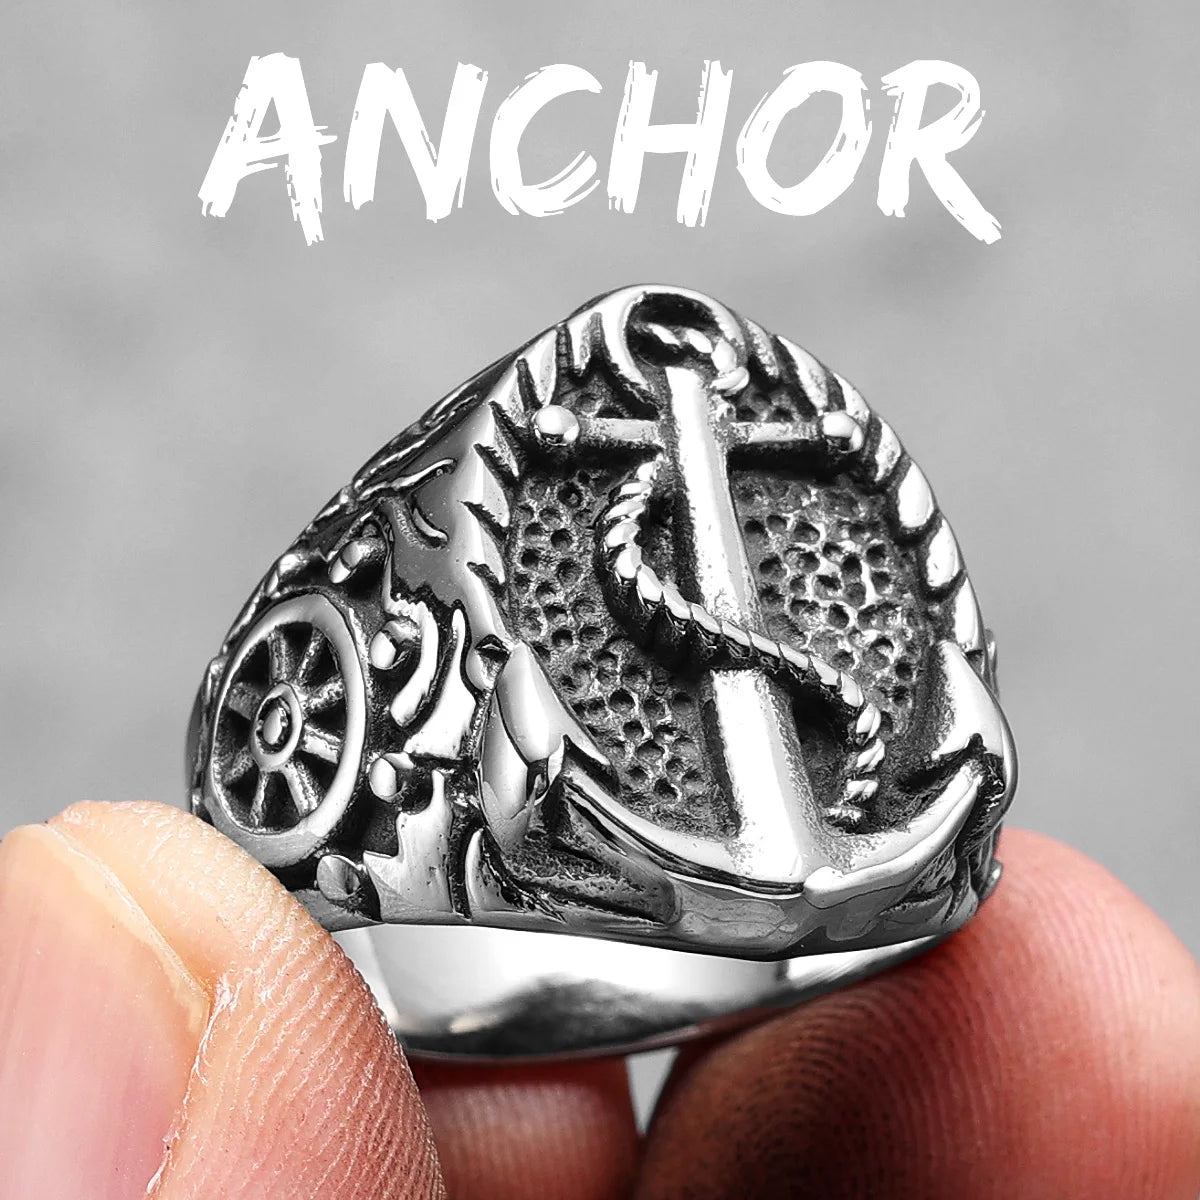 Anchor Lighthouse Ocean Sailor Ship Men Rings Stainless Steel Women Jewelry Vintage Punk Rock Fashion Accessories Gift R891-Anchor